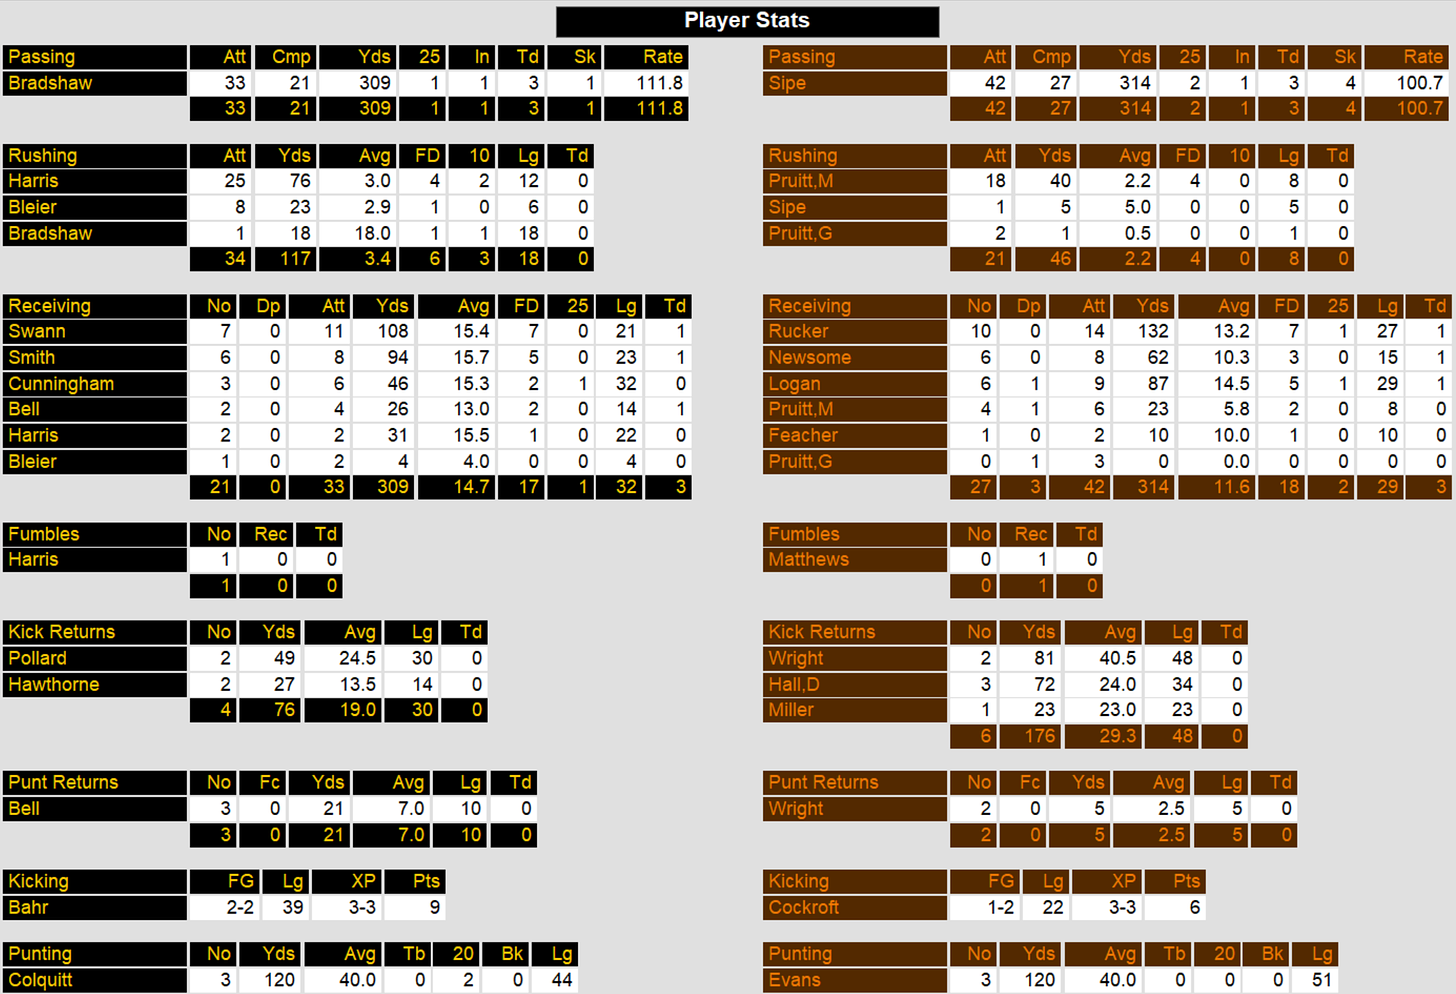 Action! PC Football Player Stats